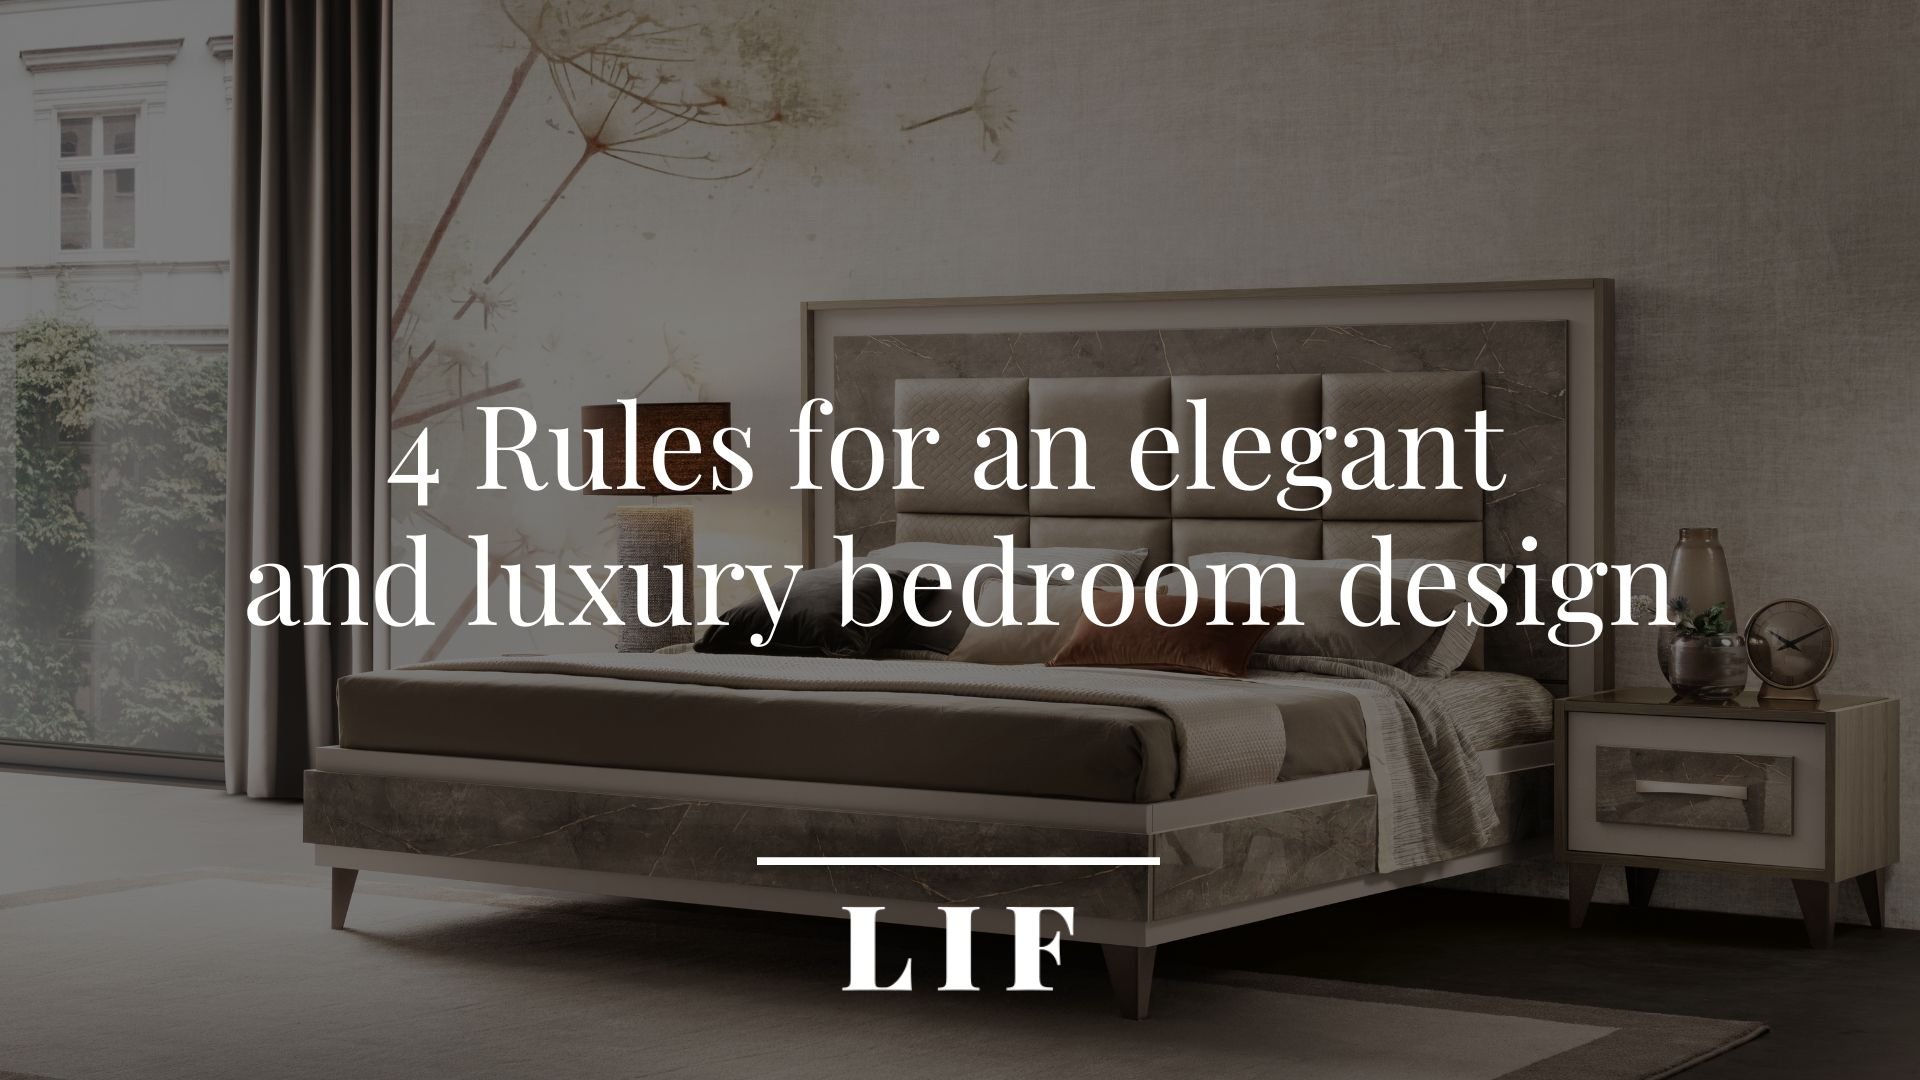 4 Rules for an elegant and luxury bedroom design